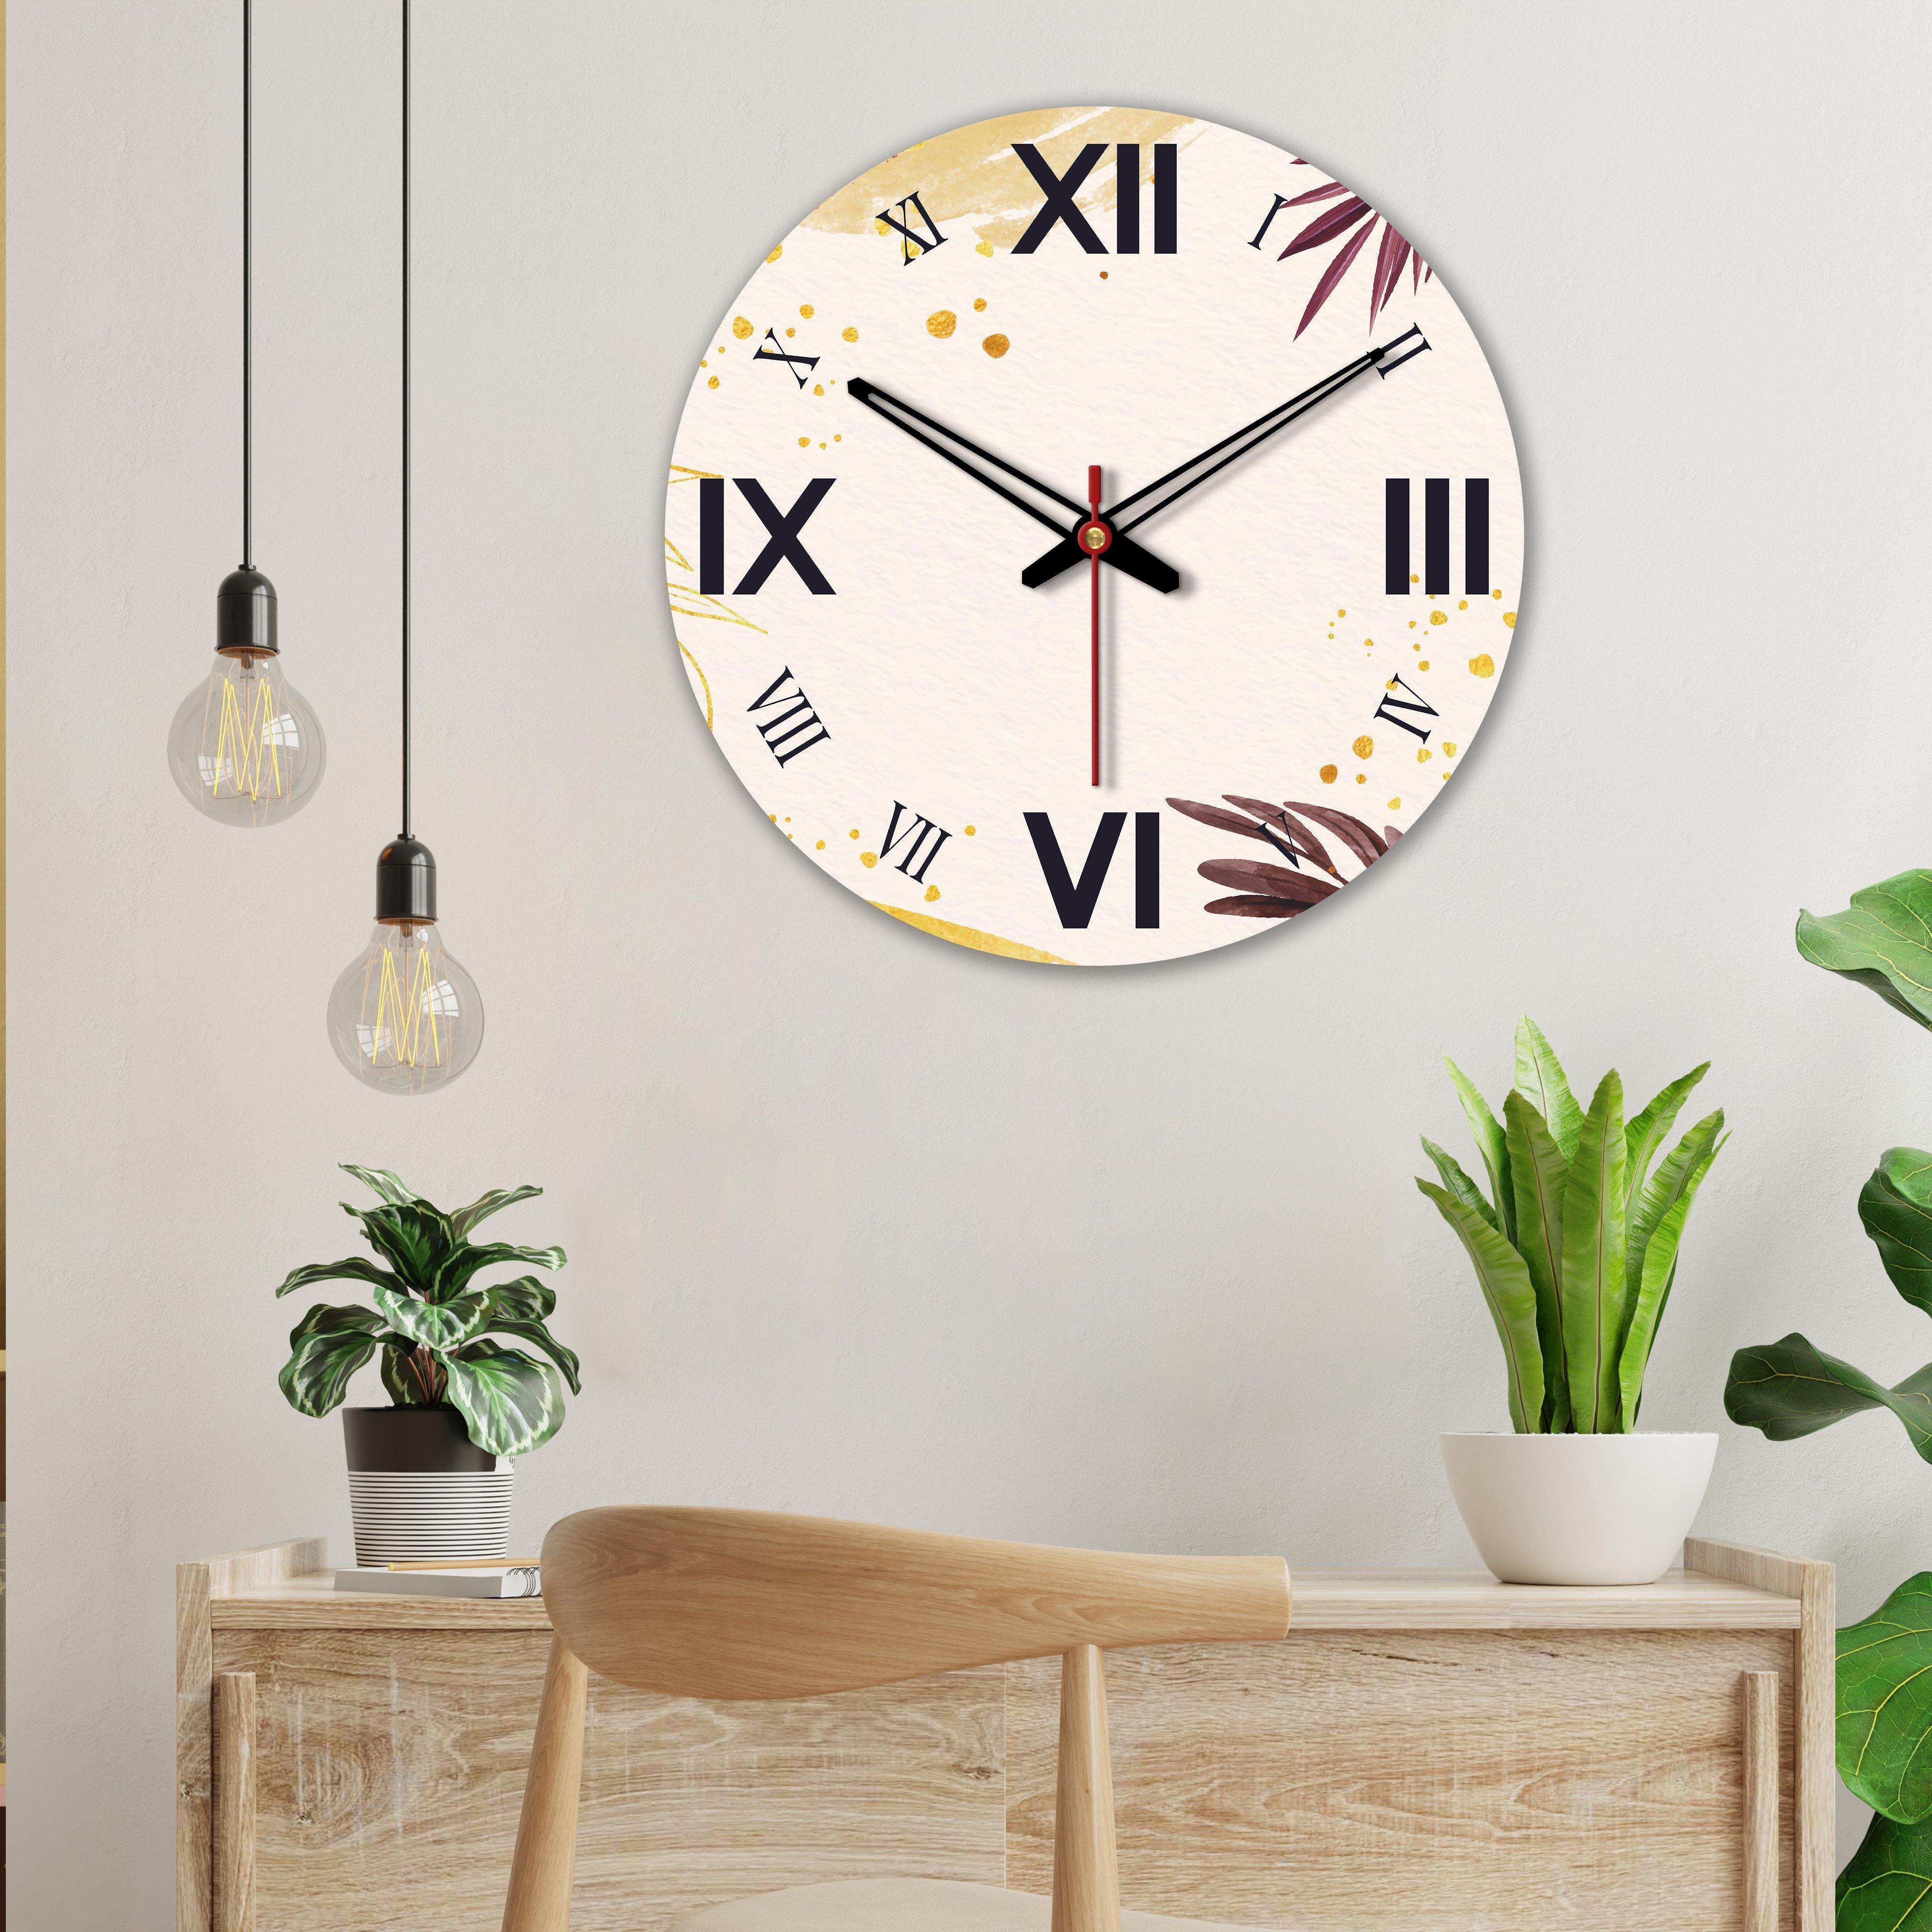 Water Color Leaves Design Wooden Wall Clock